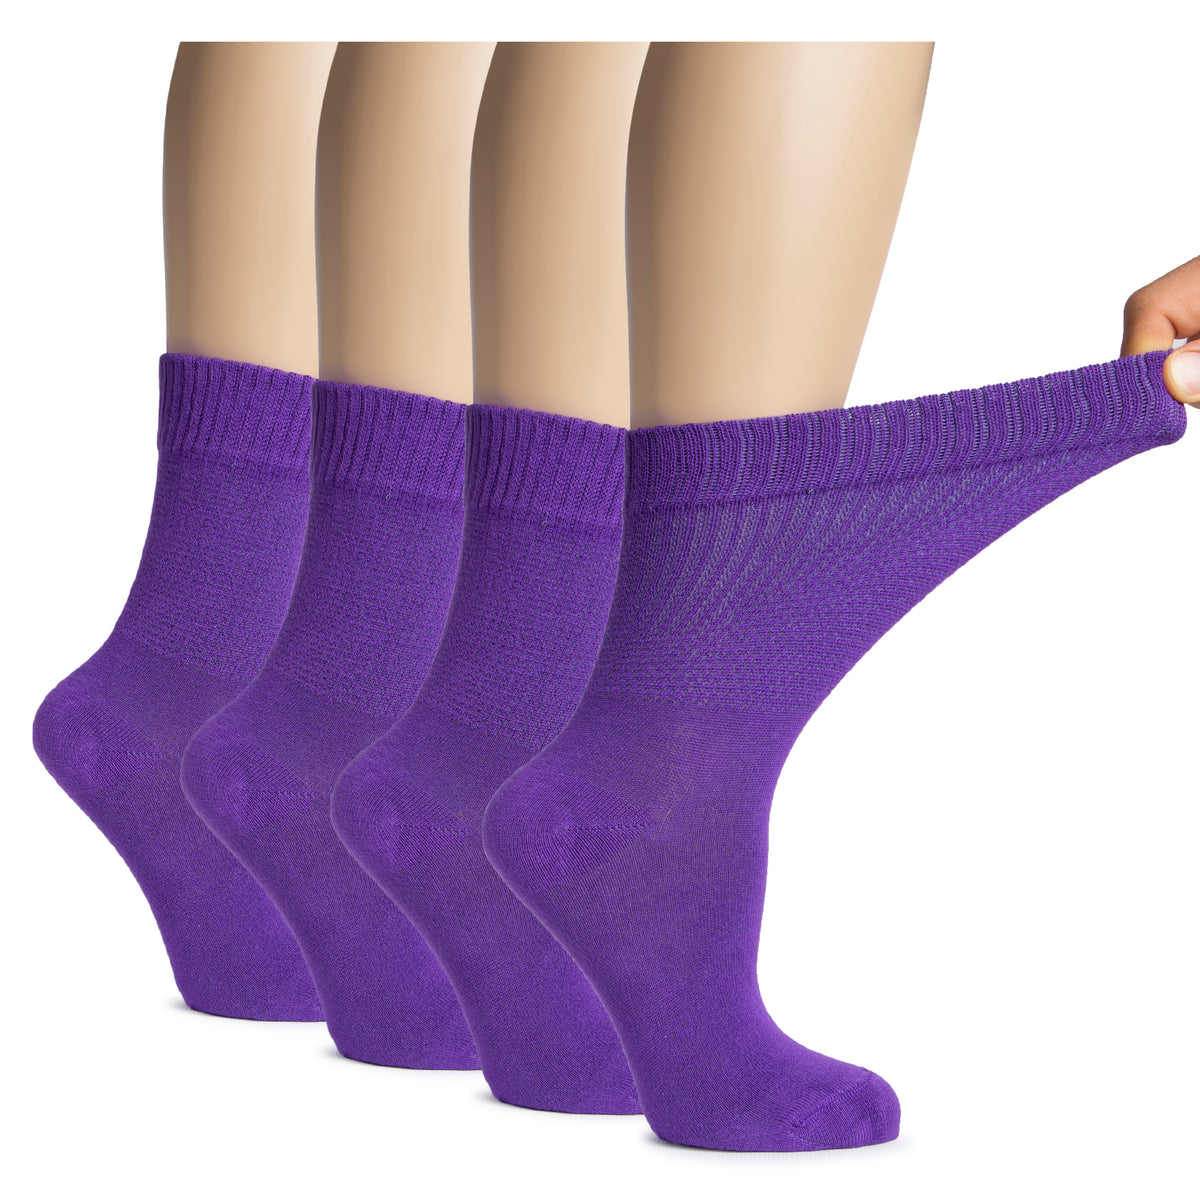 A woman's hand holds a pair of Women's Bamboo Diabetic Crew Socks in purple, designed for comfort and support.